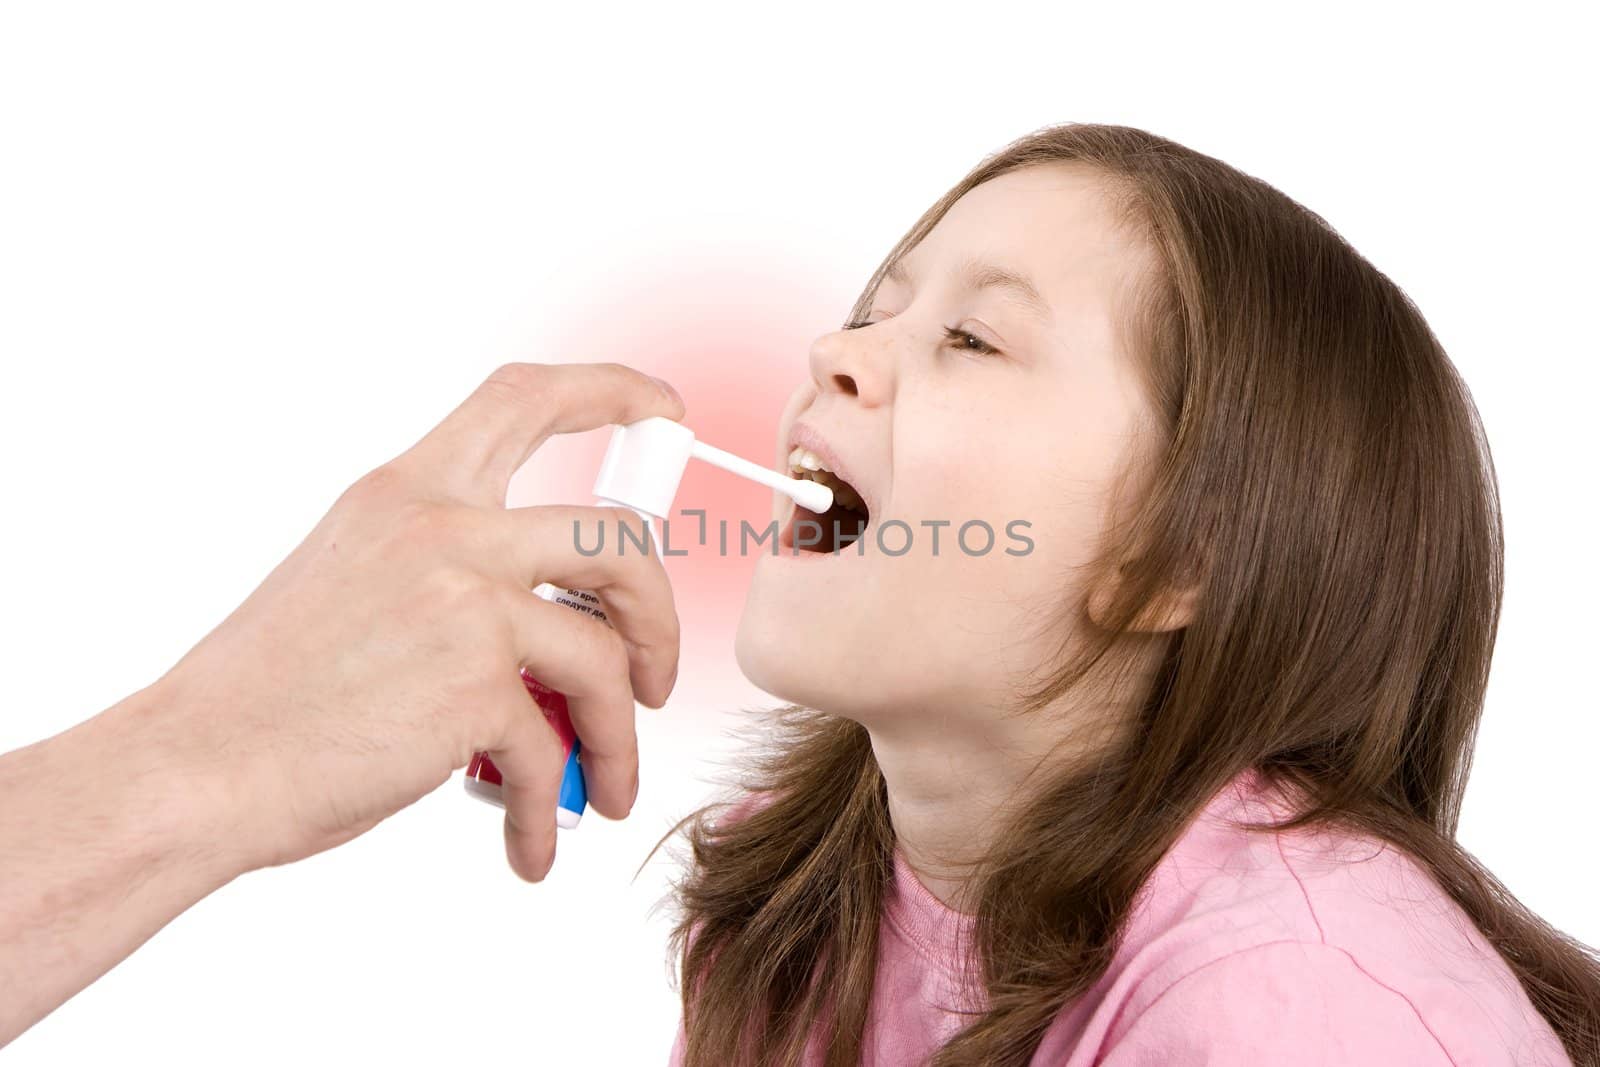 The man's hand holds capacity with a medicine near a mouth of the girl